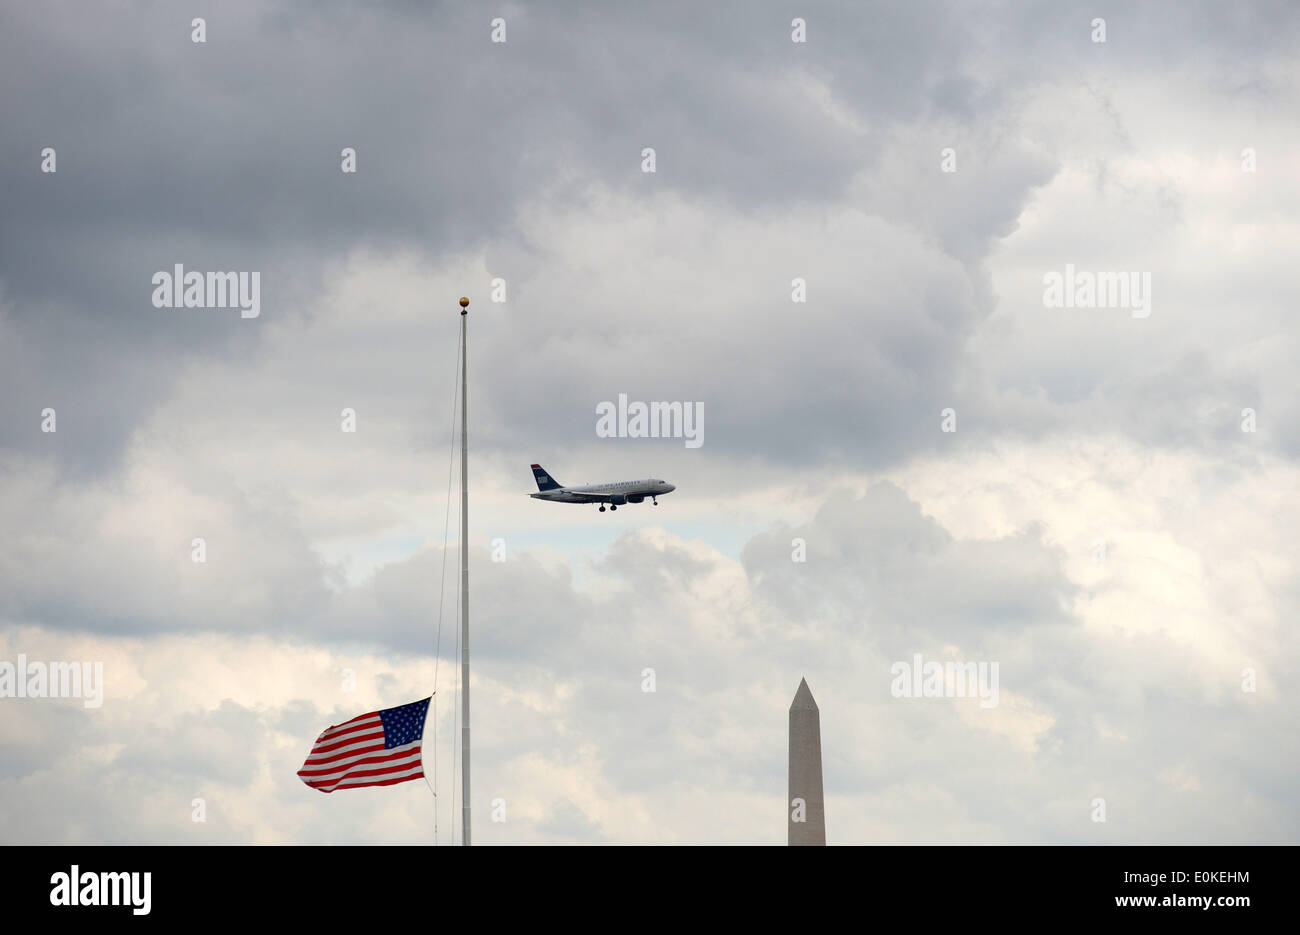 (140515) -- WASHINGTON D.C., May 15, 2014 (Xinhua) -- A flag is seen at half-staff for Peace Officers Memorial Day at the Pentagon, Washington, DC, on May 15, 2014. In 1962, President John F. Kennedy signed Public law 87-726 designating May 15th as Peace Officers Memorial Day, and the week in which may 15 falls as National Police Week. The law was amended by the Violent Crime Control and Law Enforcement Act of 1994, Public Law 103-322, signed by President Bill Clinton, directing that the flag of the United States be displayed at half-staff on all government buildings on May 15 each year.(Xinh Stock Photo